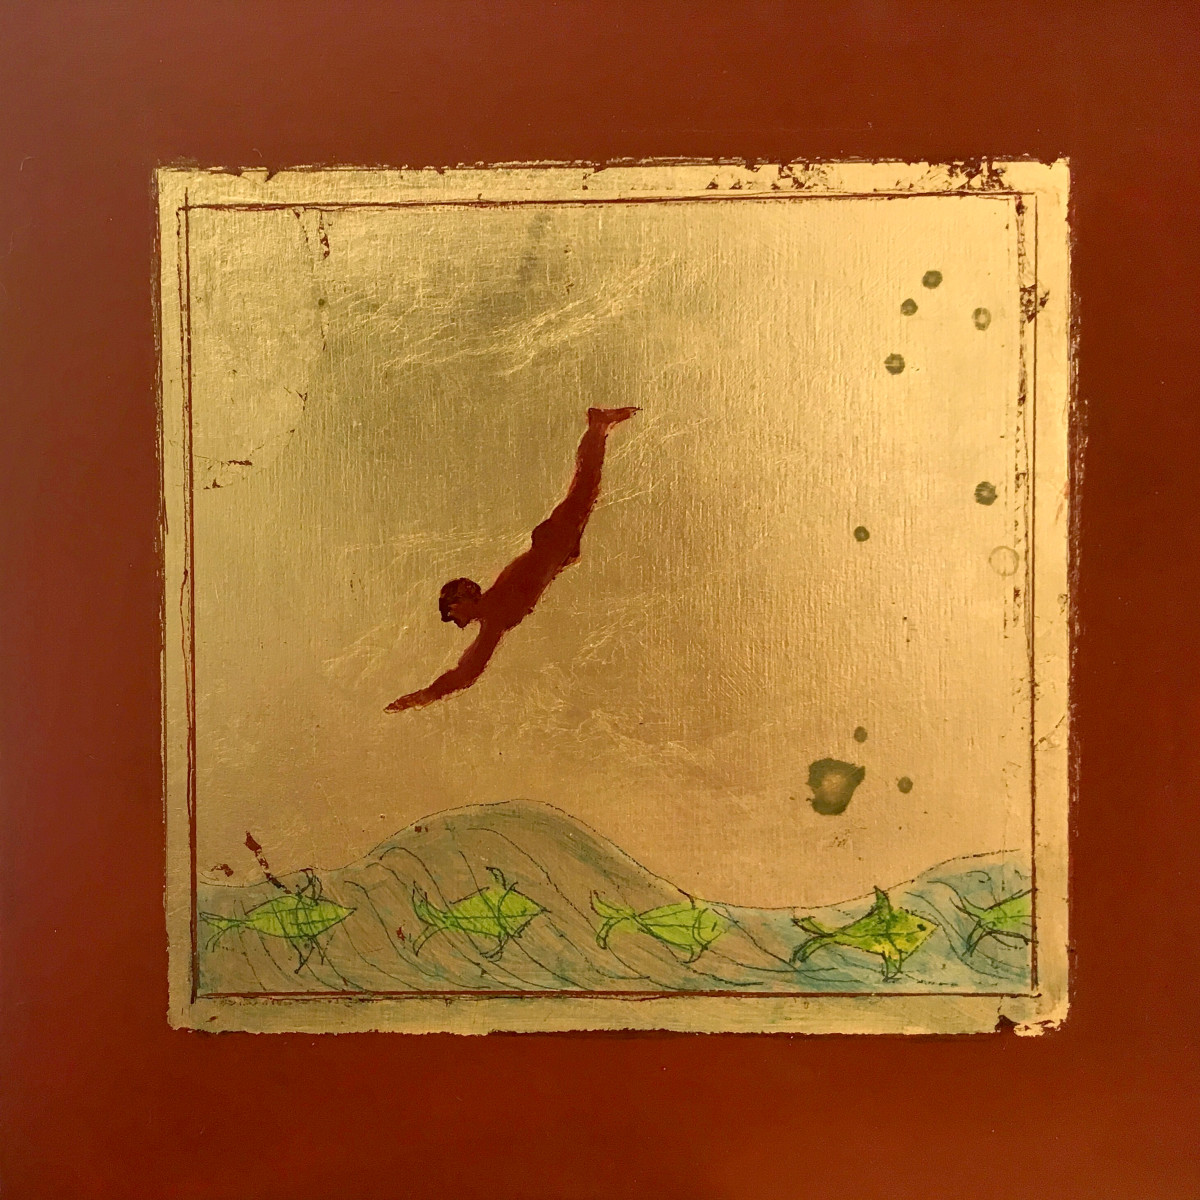 Dayglow Fish  (From a Tomb Painting) by Marie H Becker 